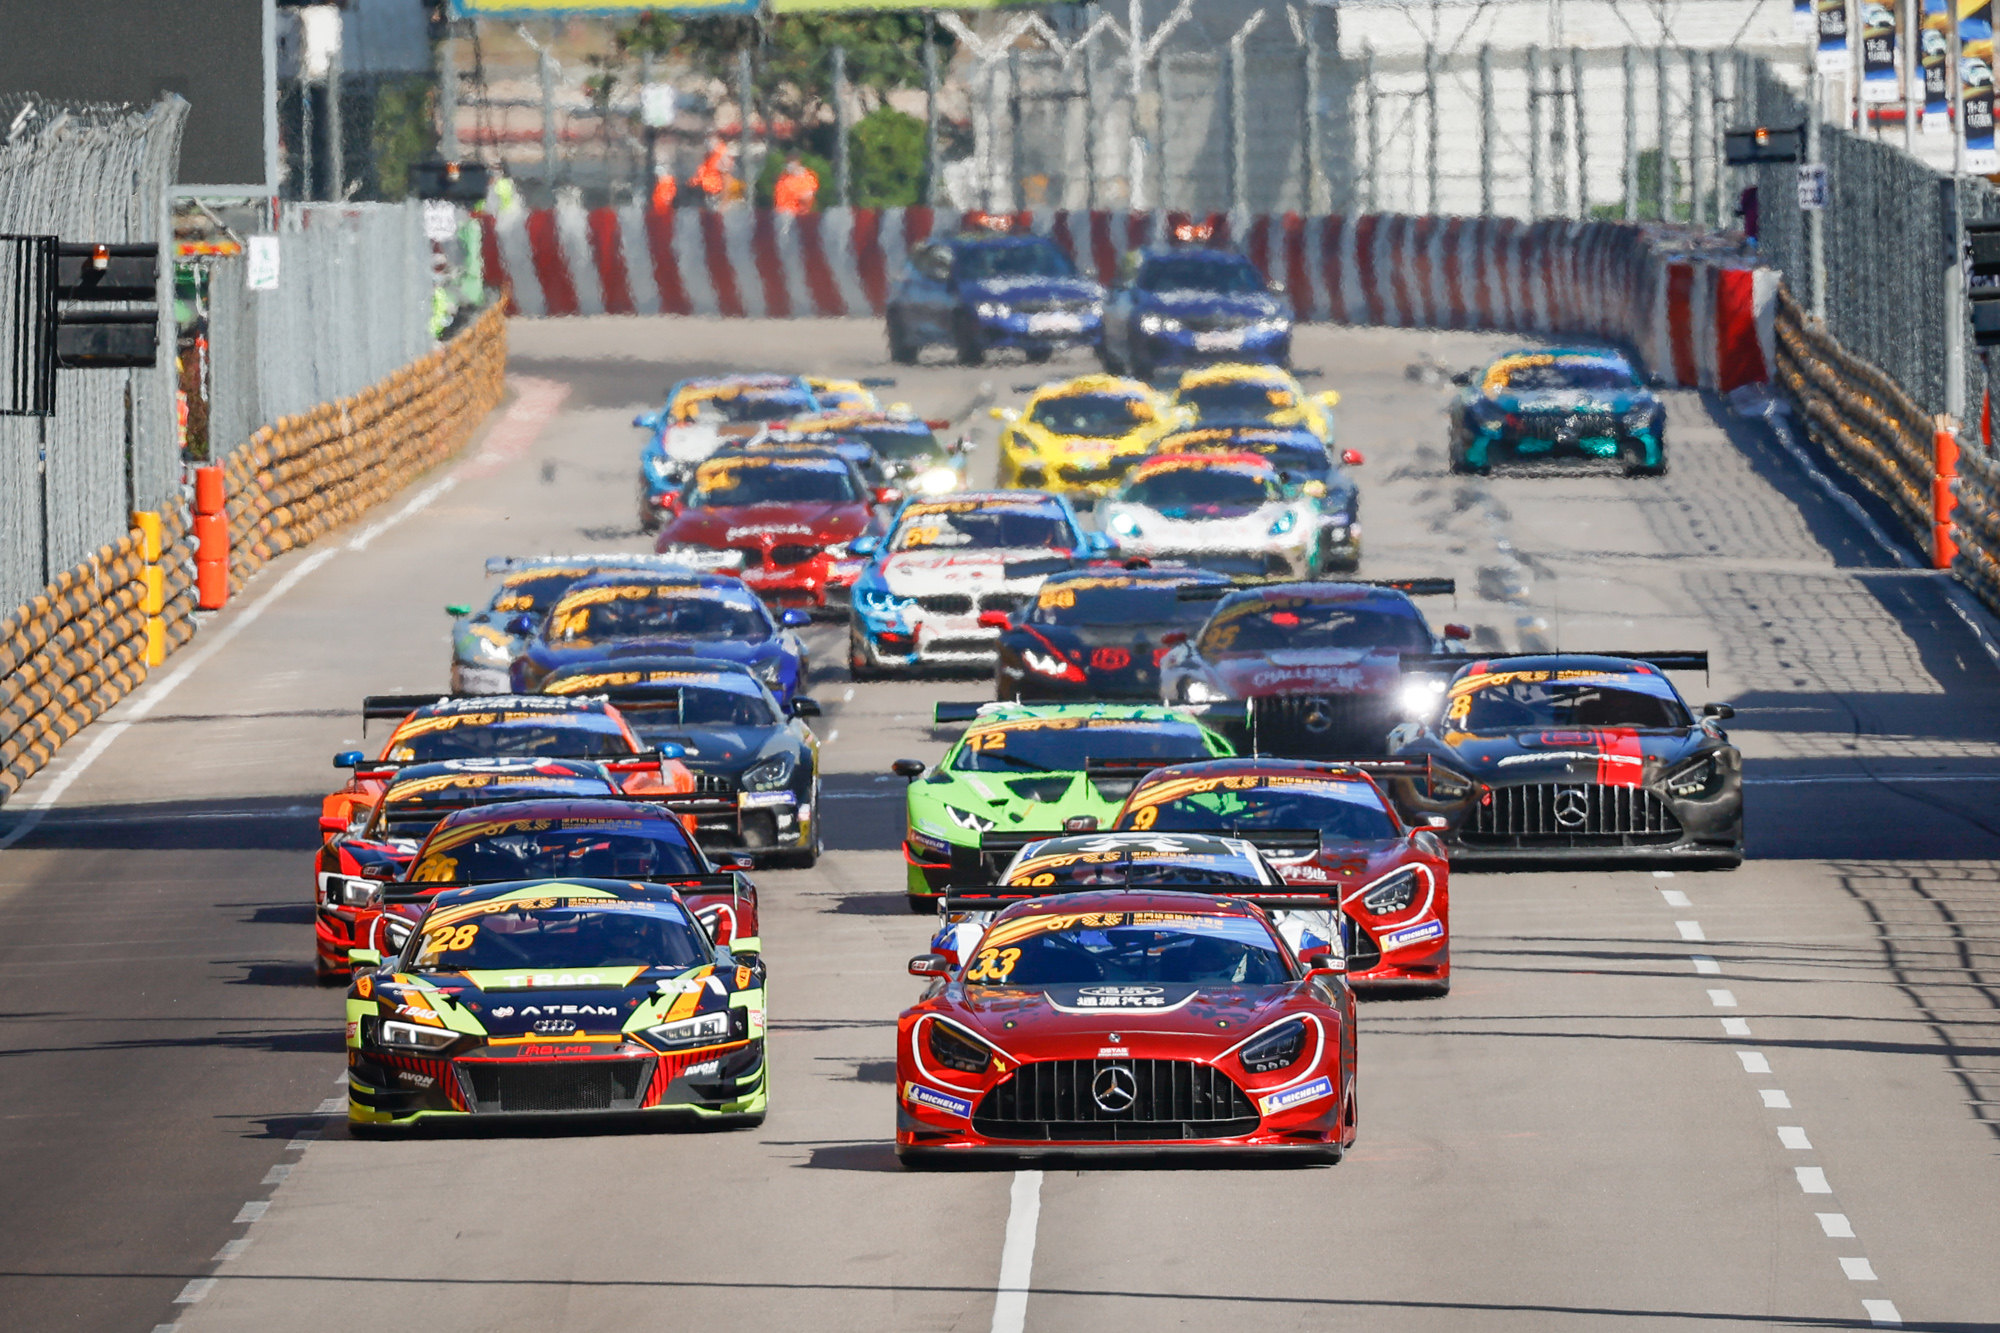 The Guia street circuit is always exciting for drivers and spectators. Photo: Macau Grand Prix